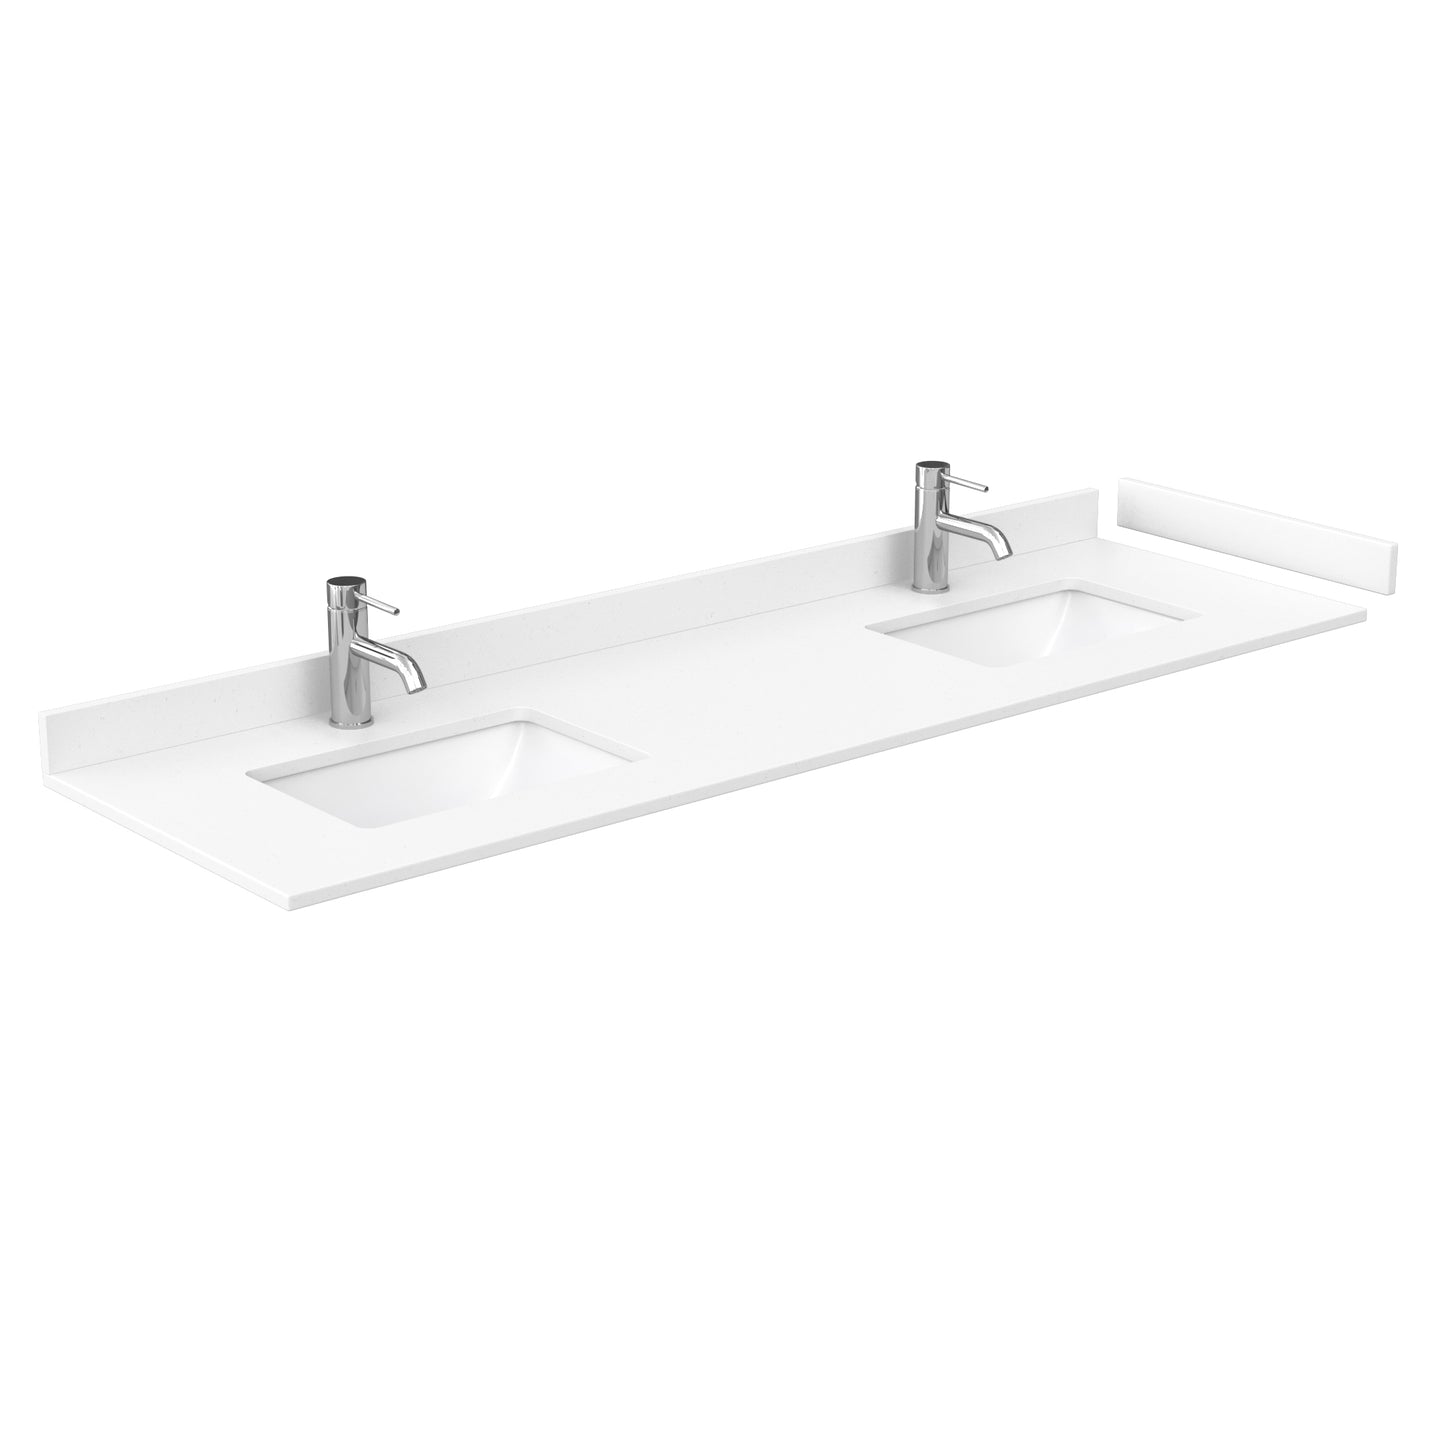 Wyndham Collection Deborah 72 Inch Double Bathroom Vanity in White with White Cultured Marble Countertop and Undermount Square Sinks - Luxe Bathroom Vanities